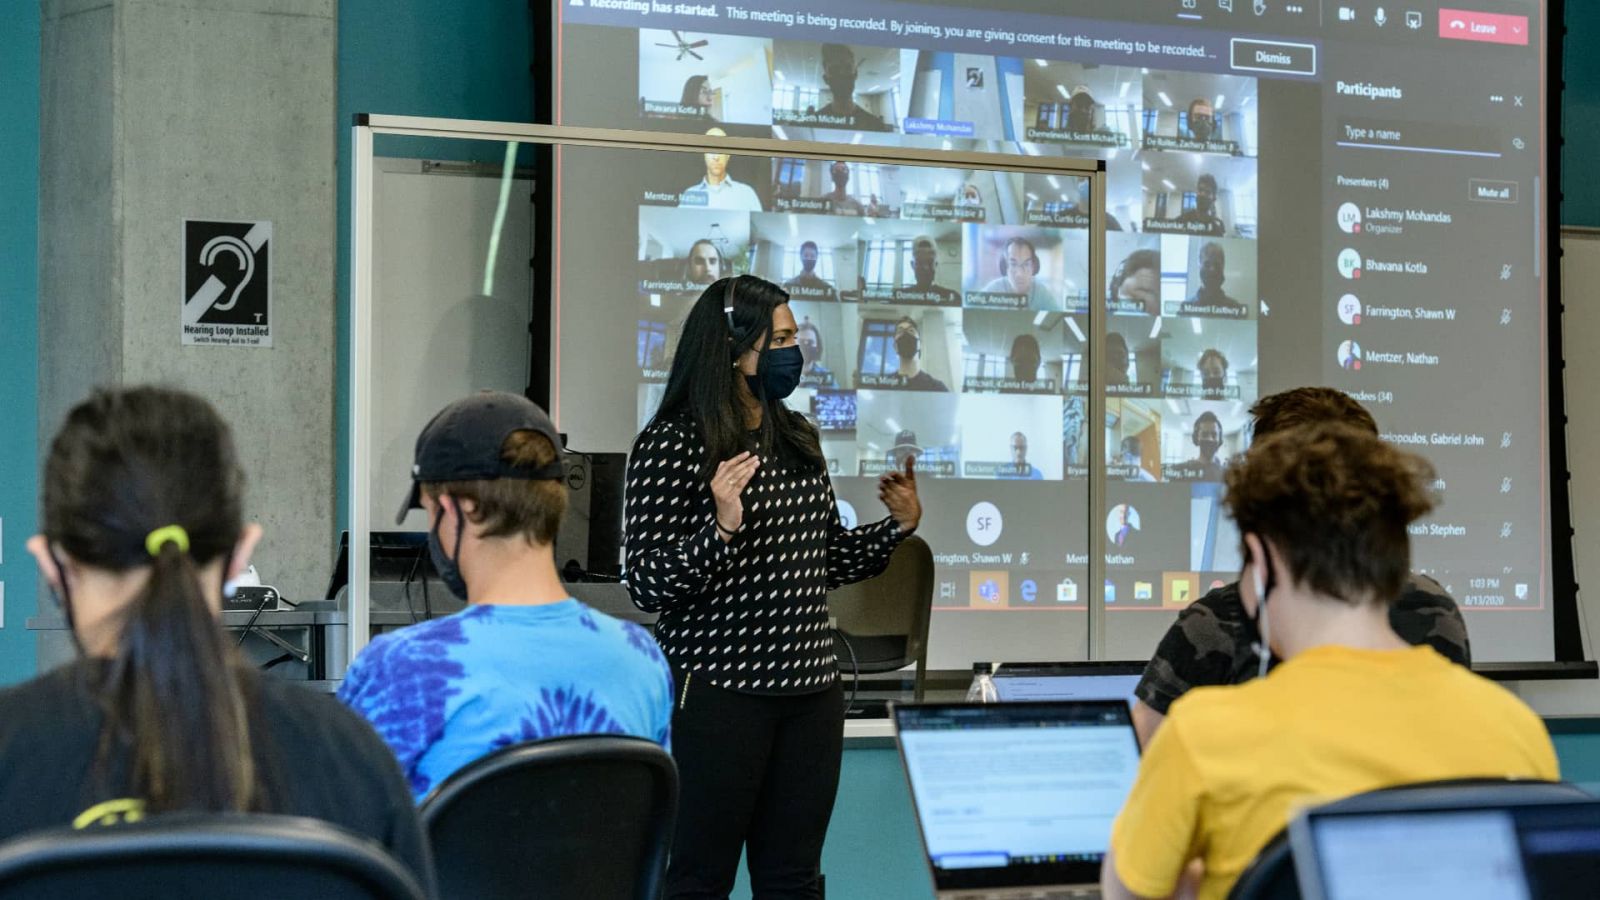 Graduate student Lakshmy Mohandas instructs Tech 120 students in person while Nathan Mentzer, associate professor of technology leadership and innovation, teaches online through Microsoft Teams at the same time. The blend of both face-to-face and online instruction, also known as a HyFlex model, give students the option to stay home and participate in class in real-time online or physically attend on any given day. (Purdue University photo/John Underwood)